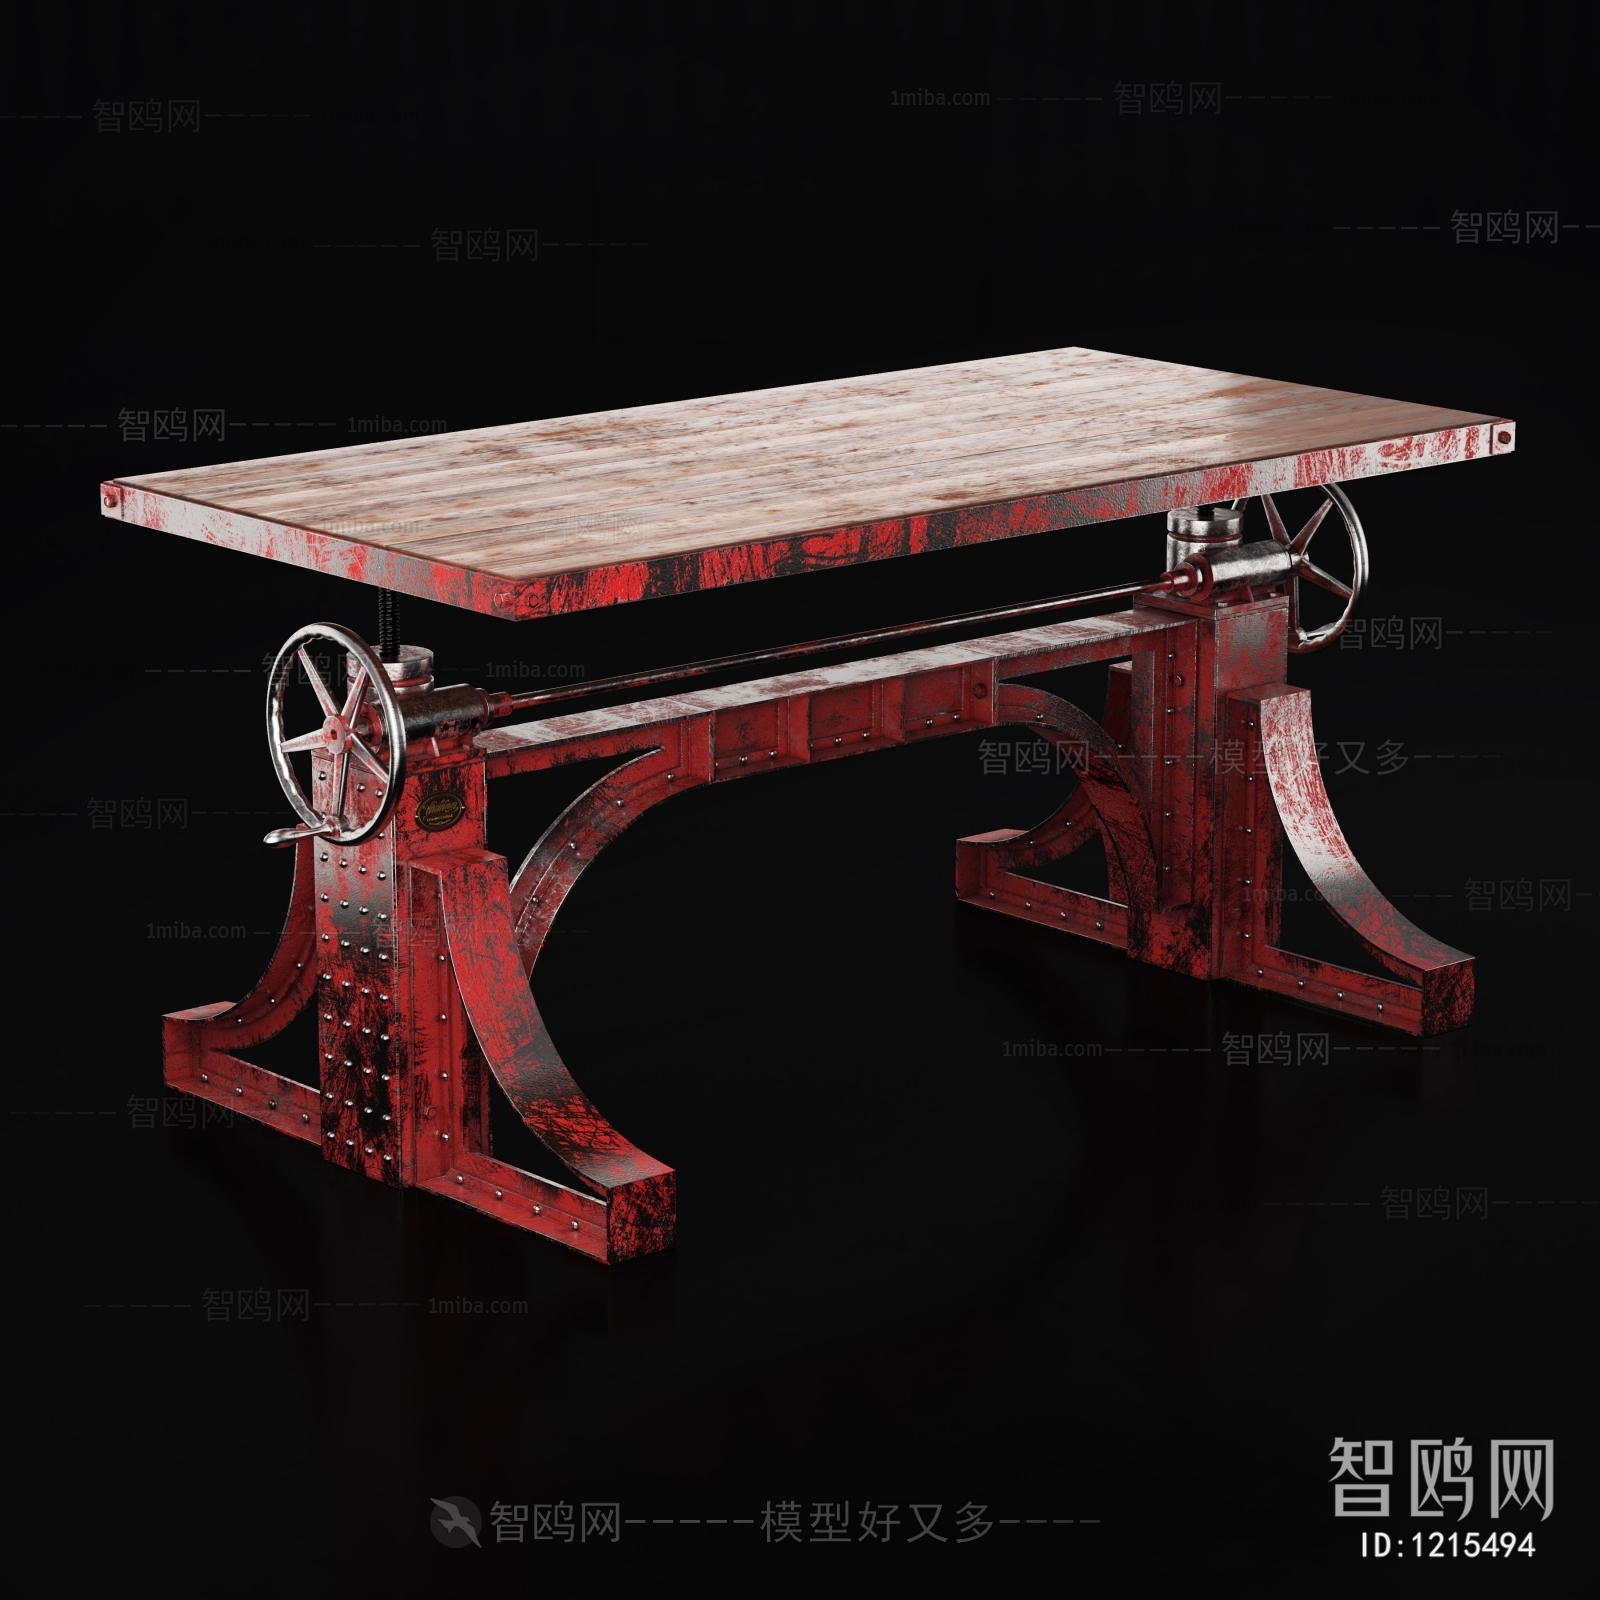 Industrial Style Leisure Table And Chair